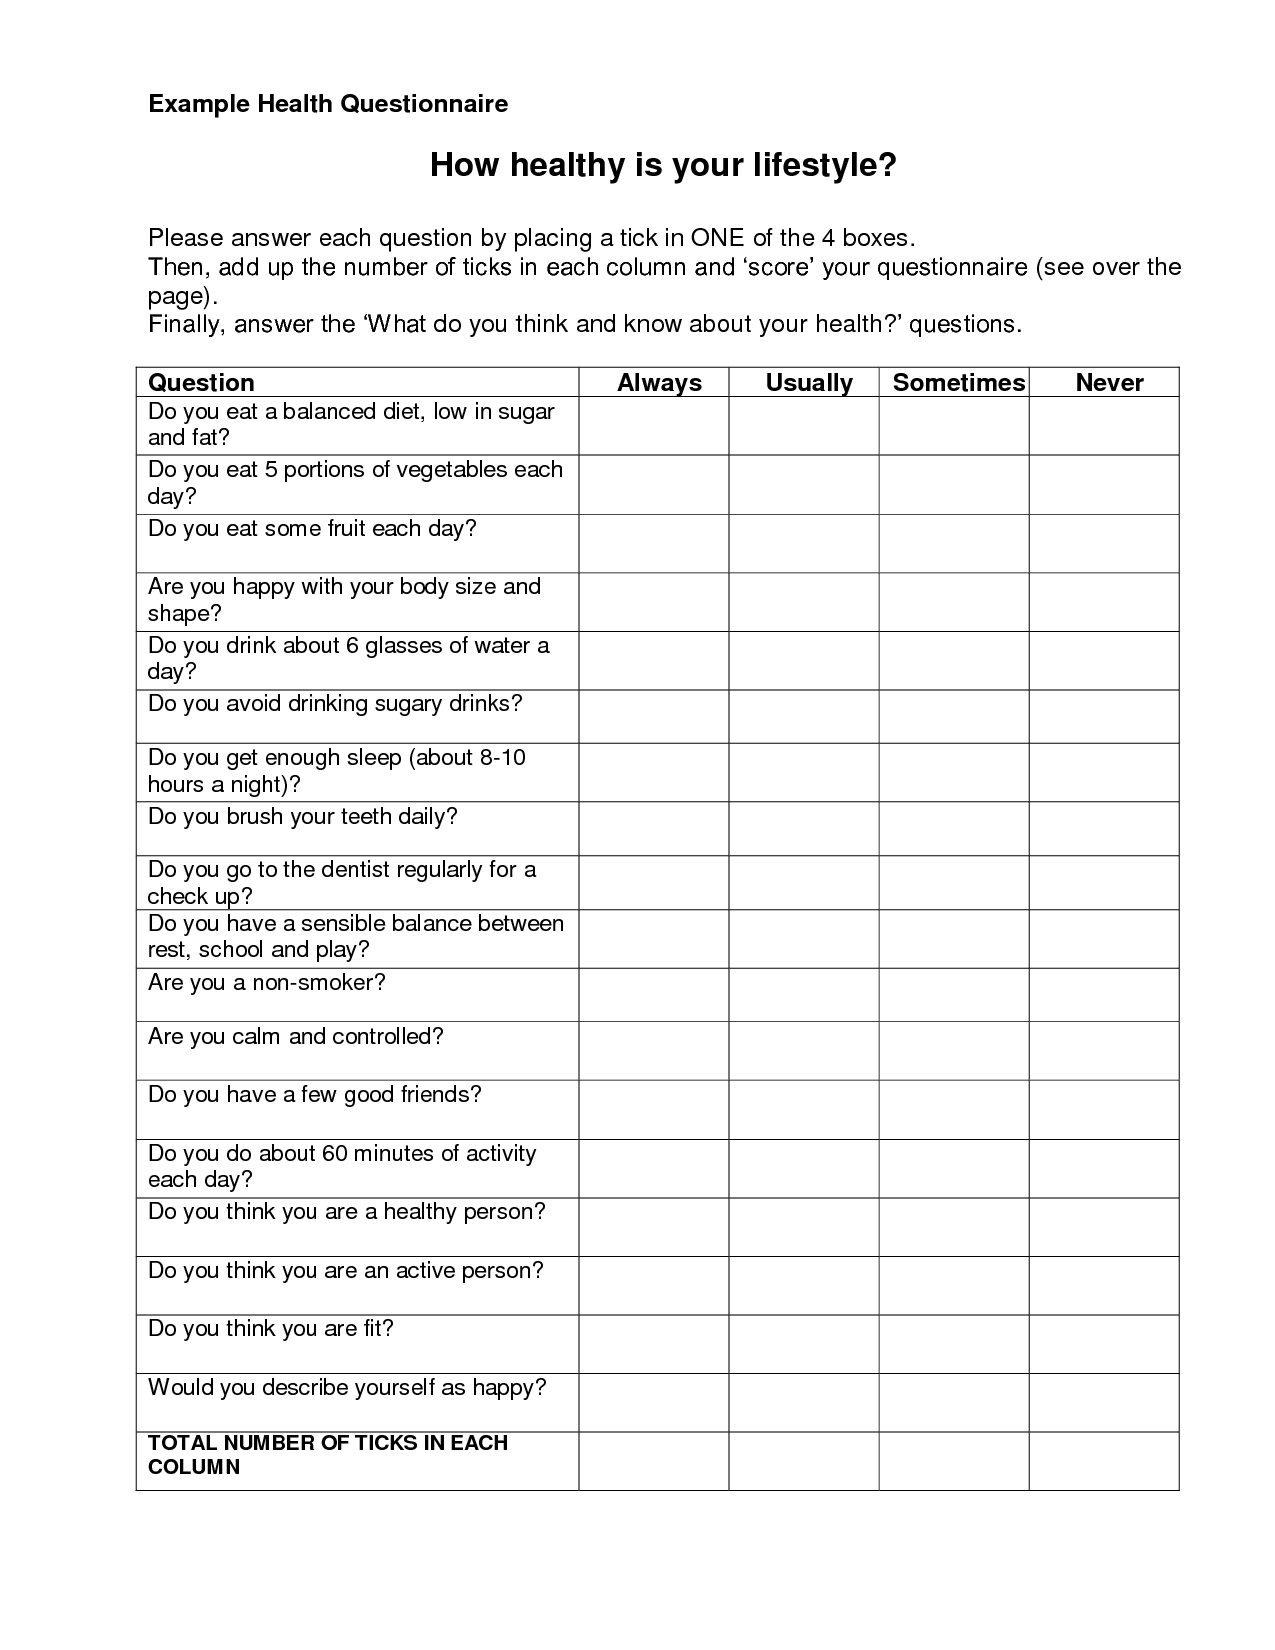 example of a health screening questionnaire for fitness